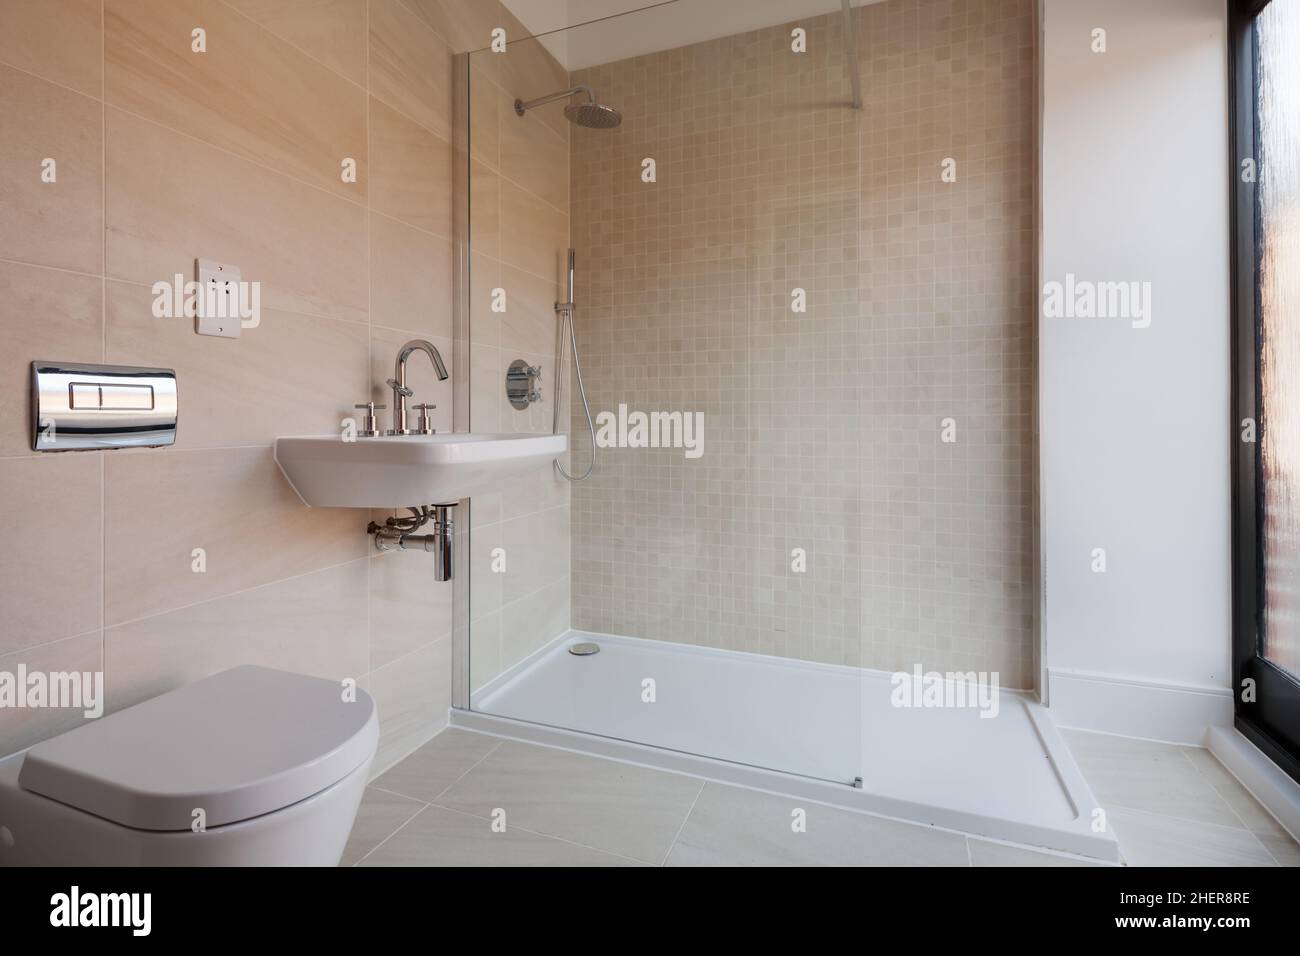 Cowlinge, Suffolk, England - 28 March 2019: Luxury generic bathroom suite with tiled walls and floor glass fronted shower cubicle , sink, toilet and w Stock Photo